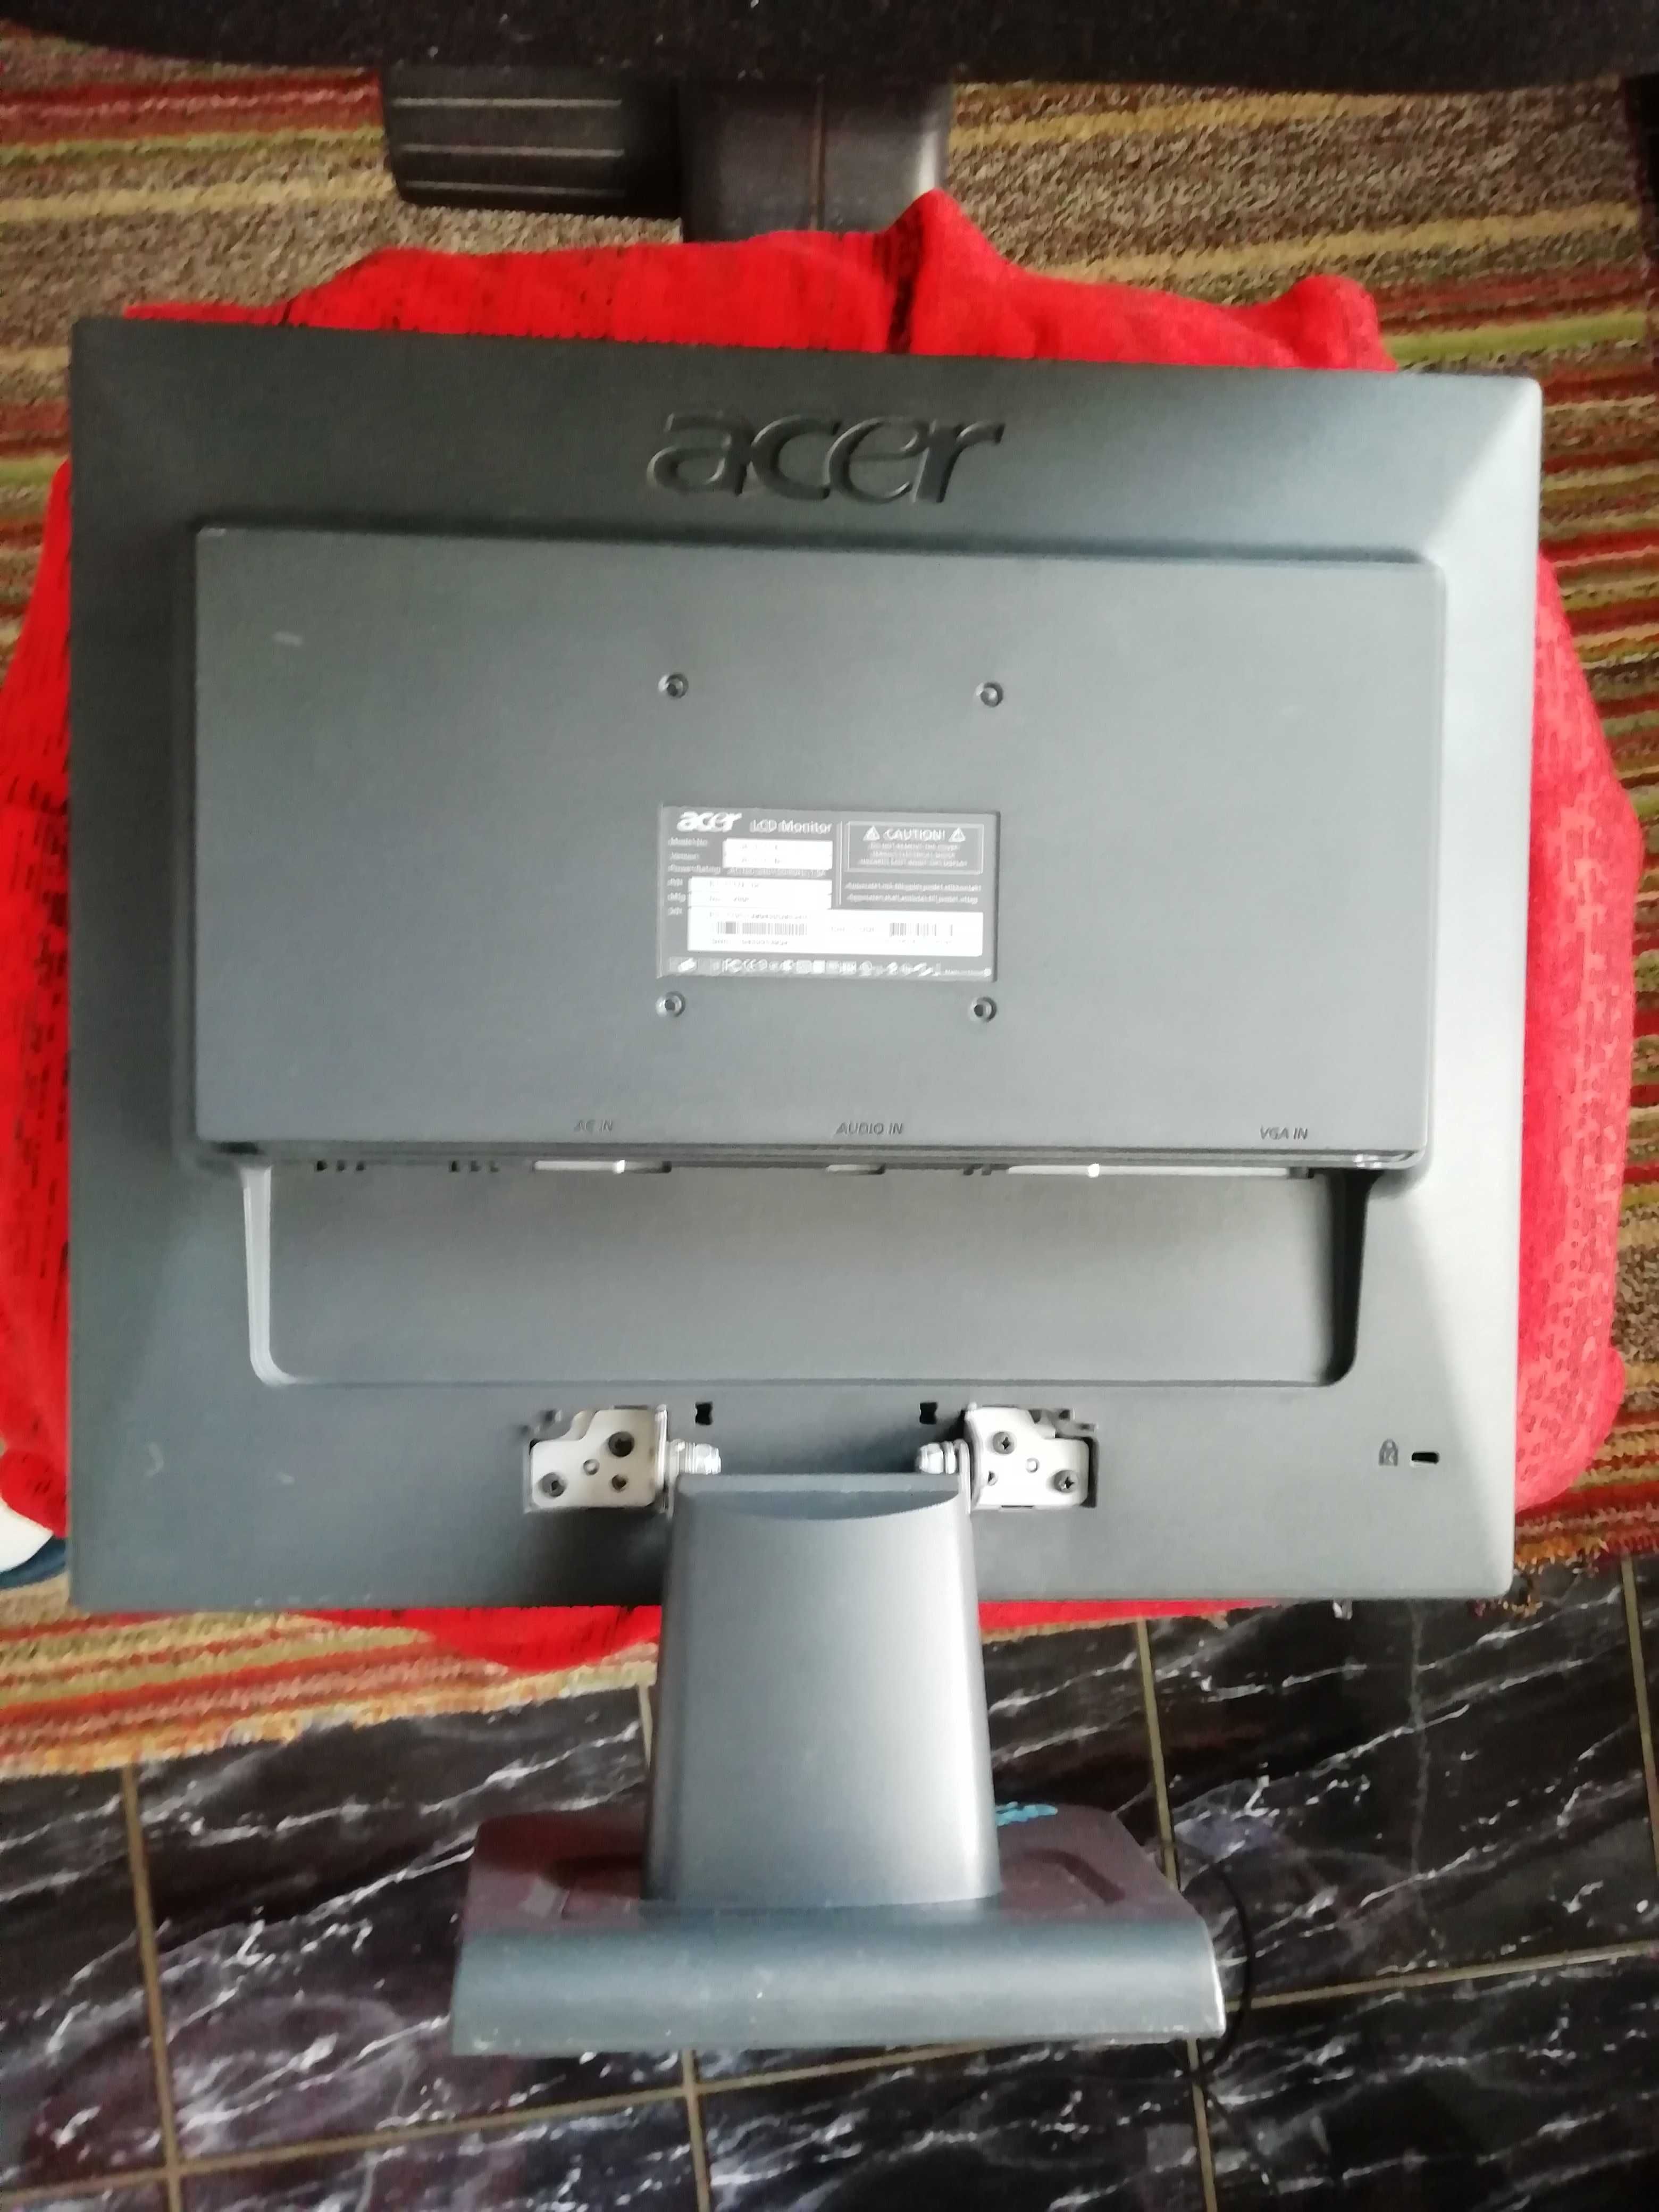 Monitor Acer 17"